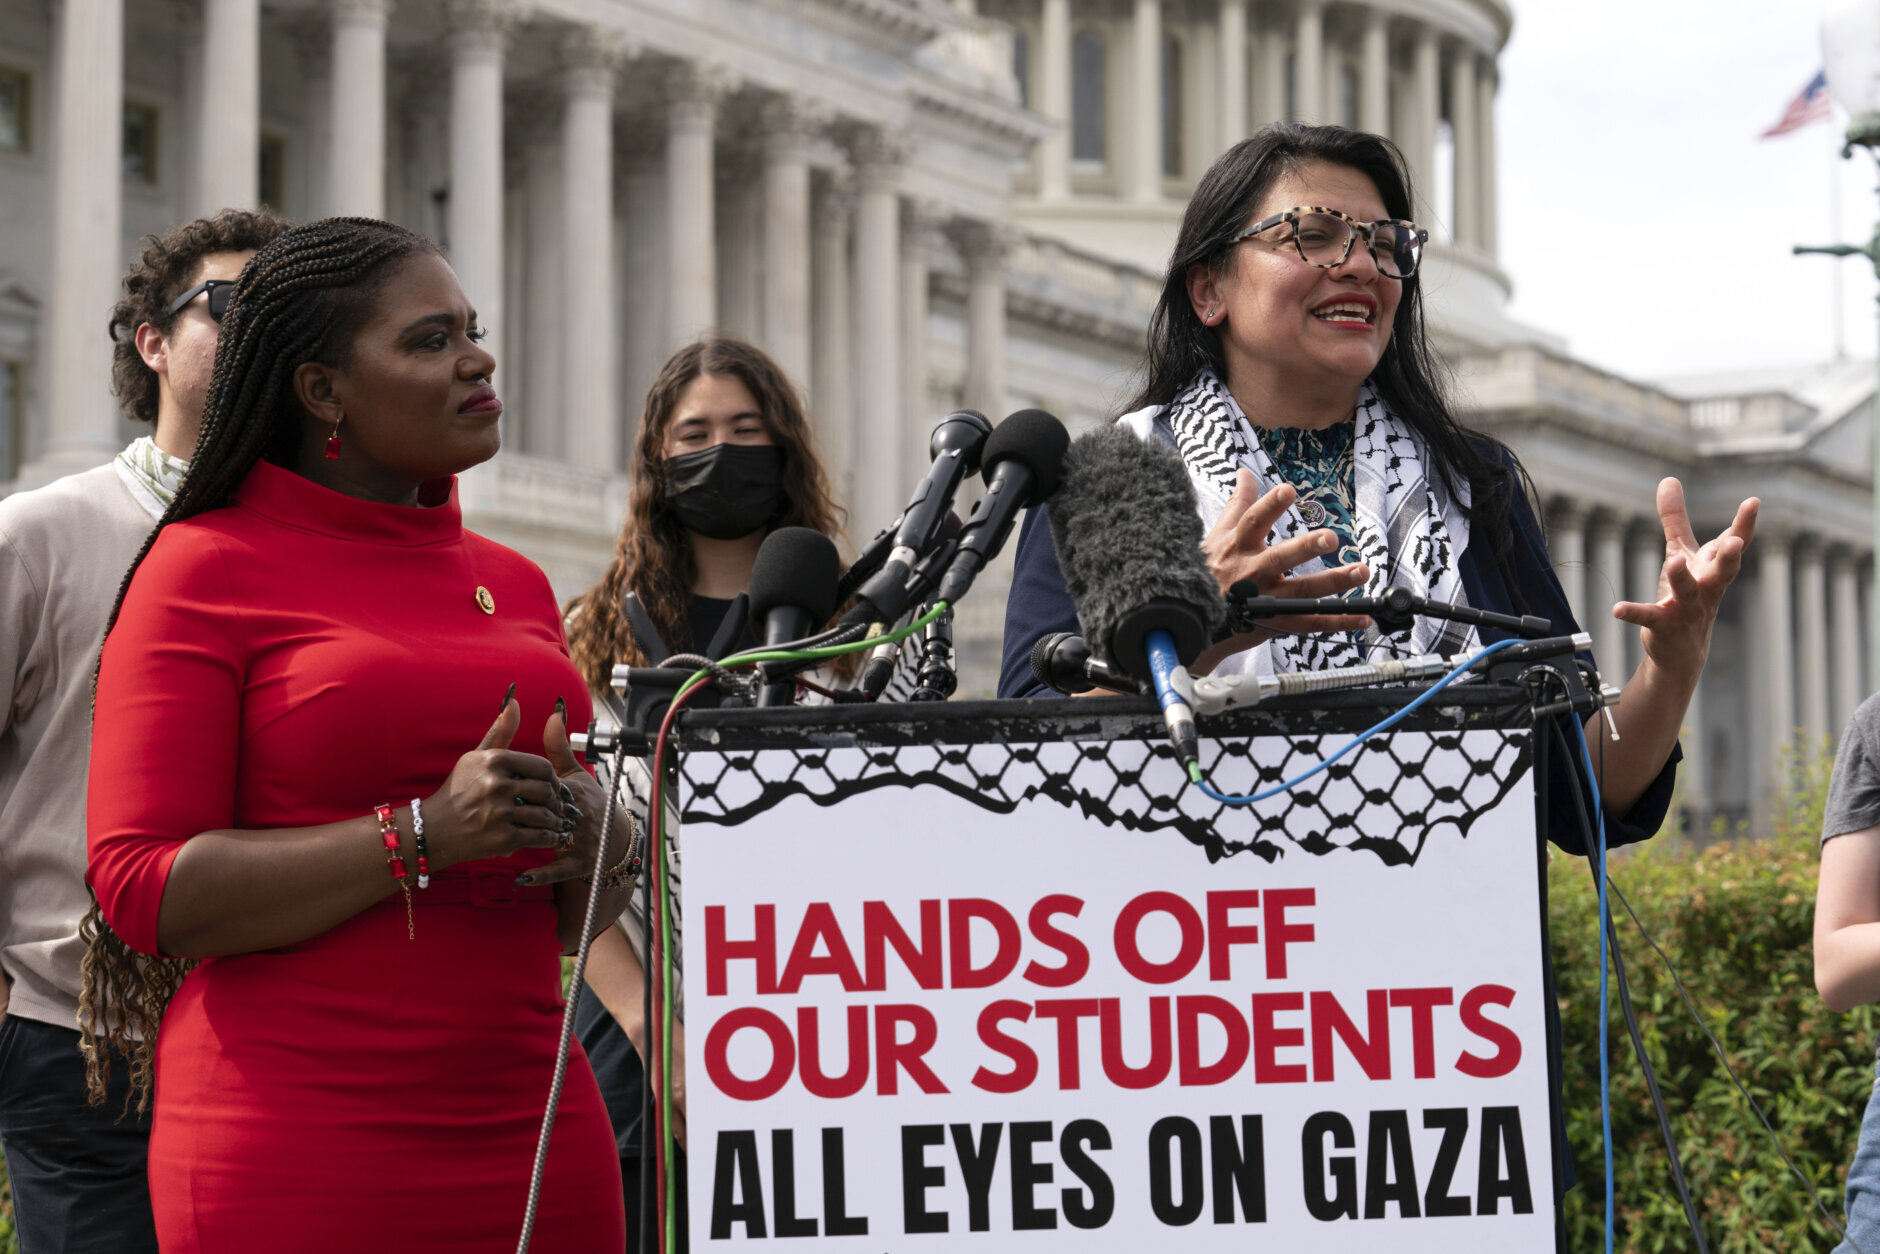 Rep. Cori Bush, D-Mo., and Rep. Rashida Tlaib, D-Mich., accompanied by George Washington University students speaks during a news conference at the U.S. Capitol, Wednesday, May 8, 2024, in Washington, after police cleared a pro-Palestinian tent encampment at George Washington University early Wednesday and arrested demonstrators. (AP Photo/Jose Luis Magana)